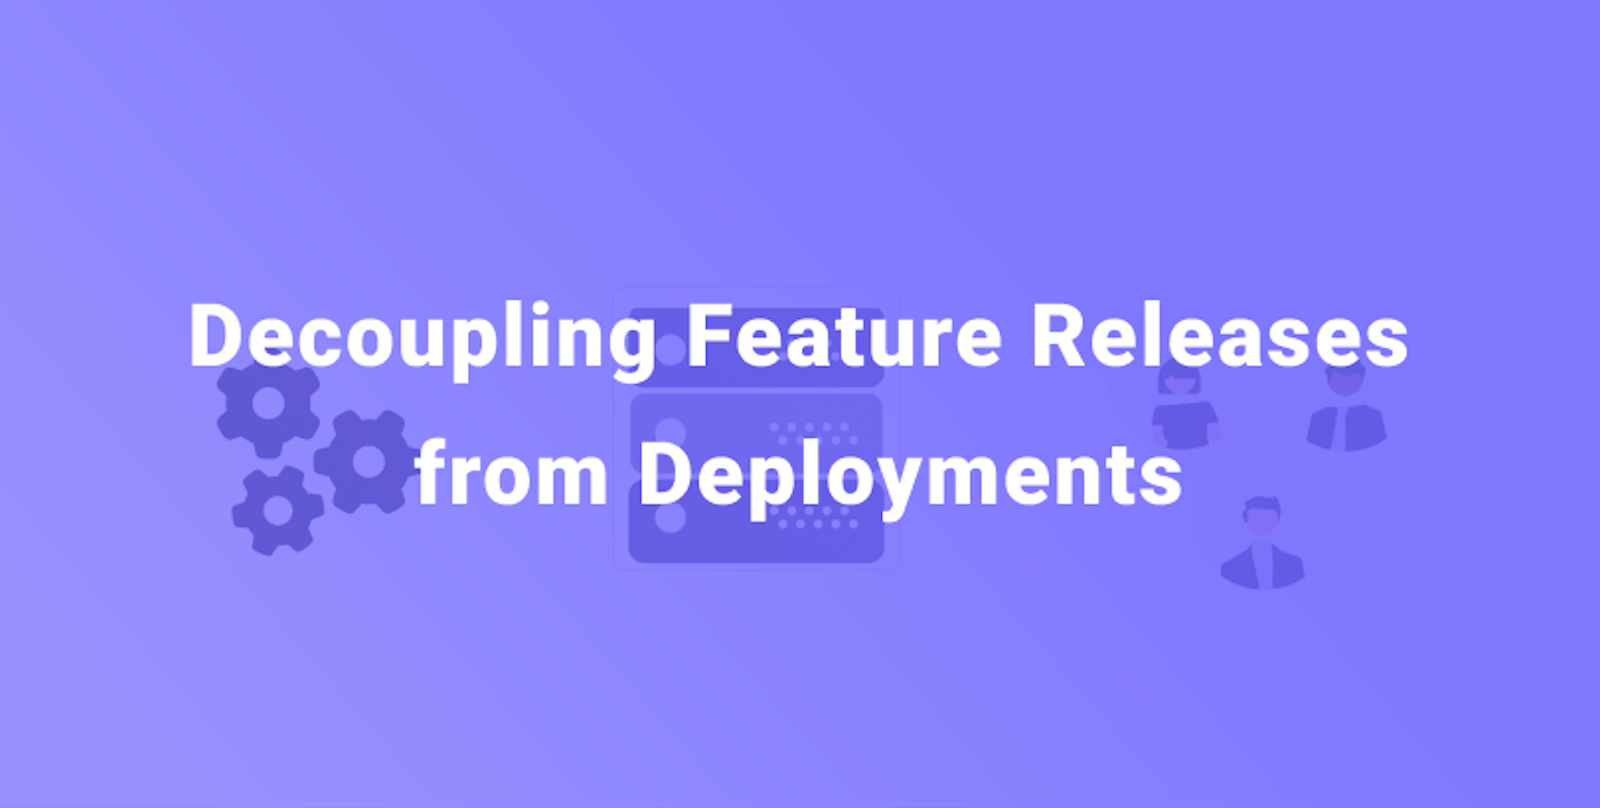 Decoupling Feature Releases from Deployment Using Feature Flags